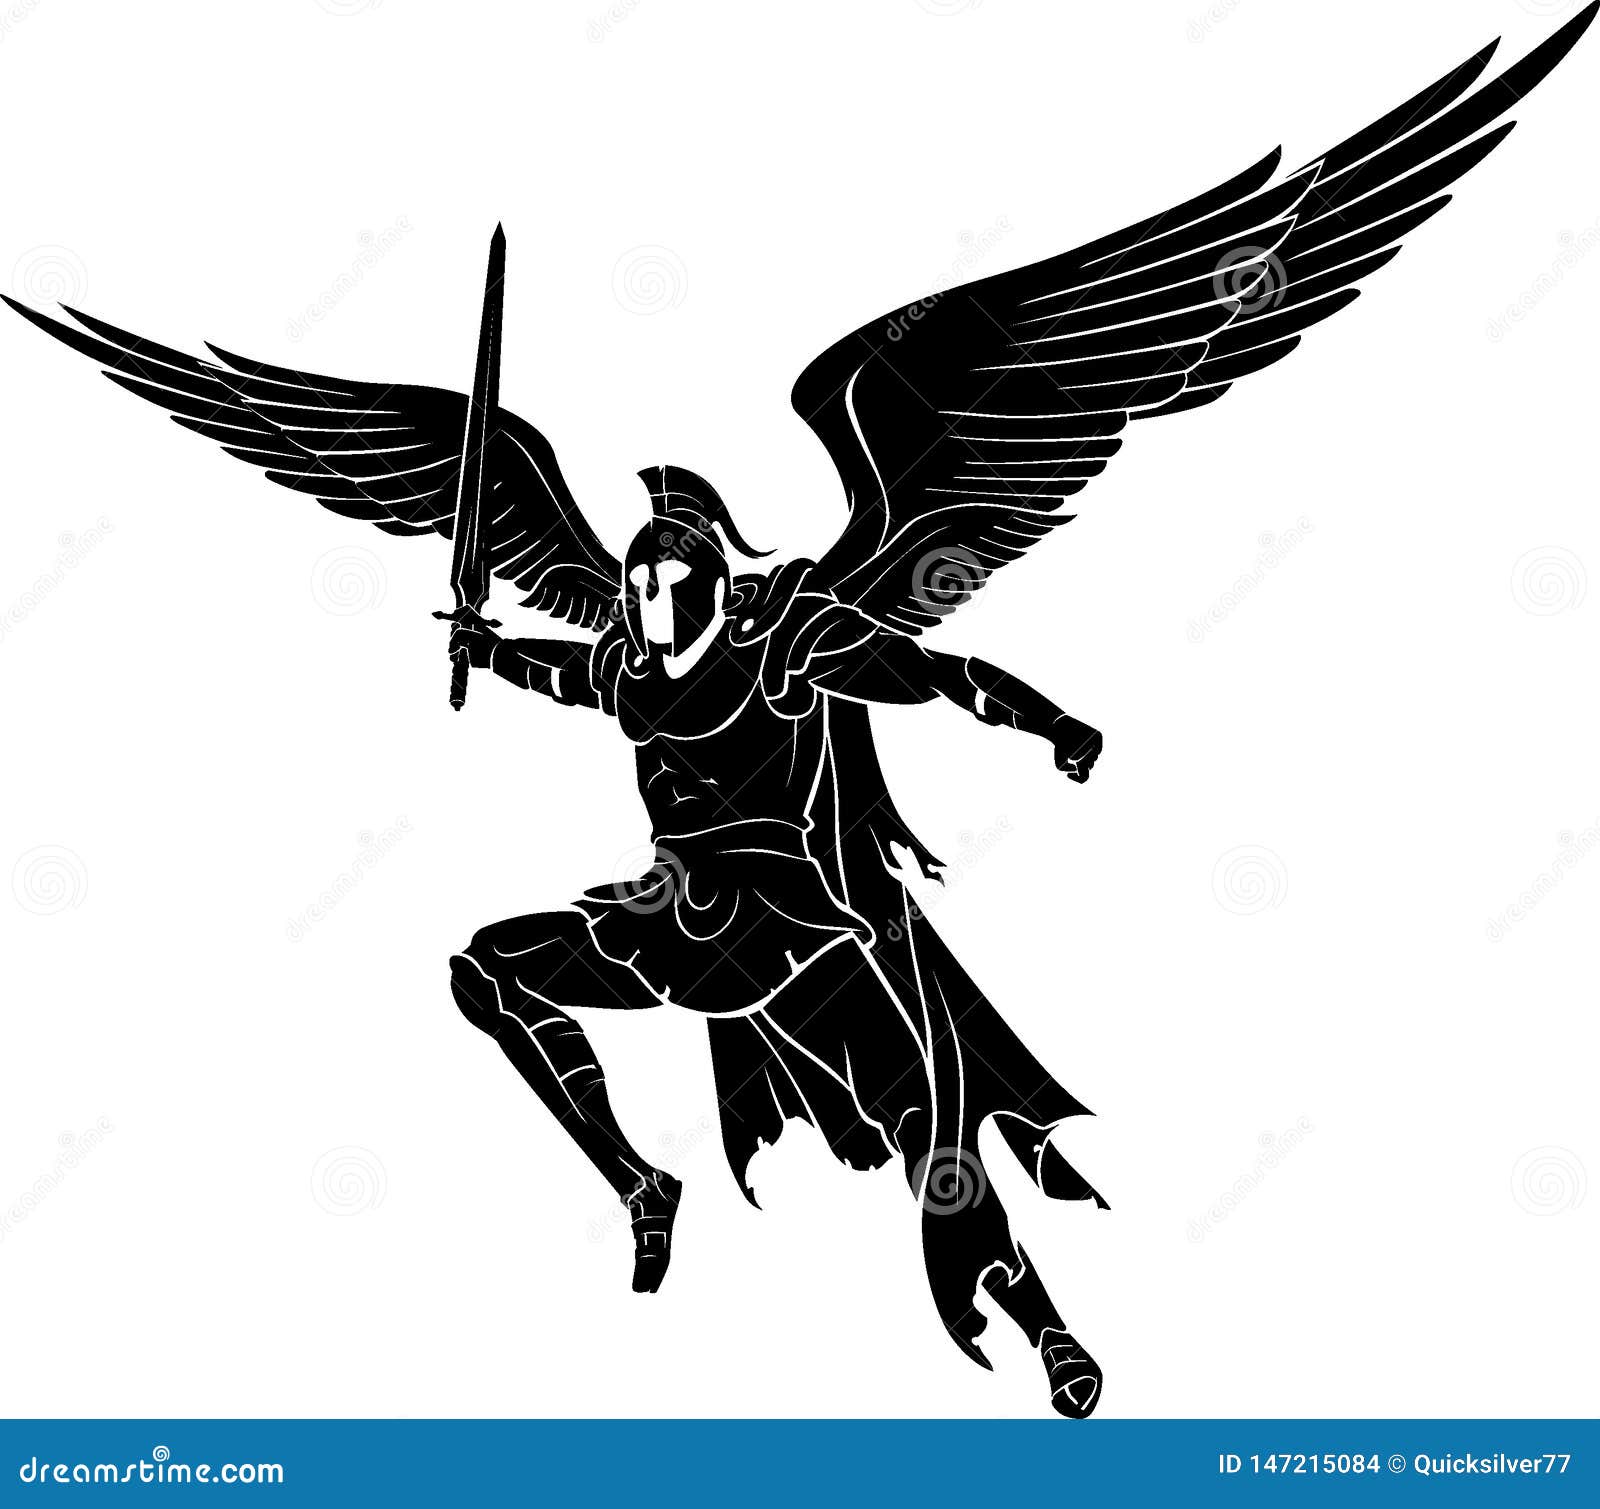 Archangel Cartoons, Illustrations & Vector Stock Images - 1937 Pictures ...